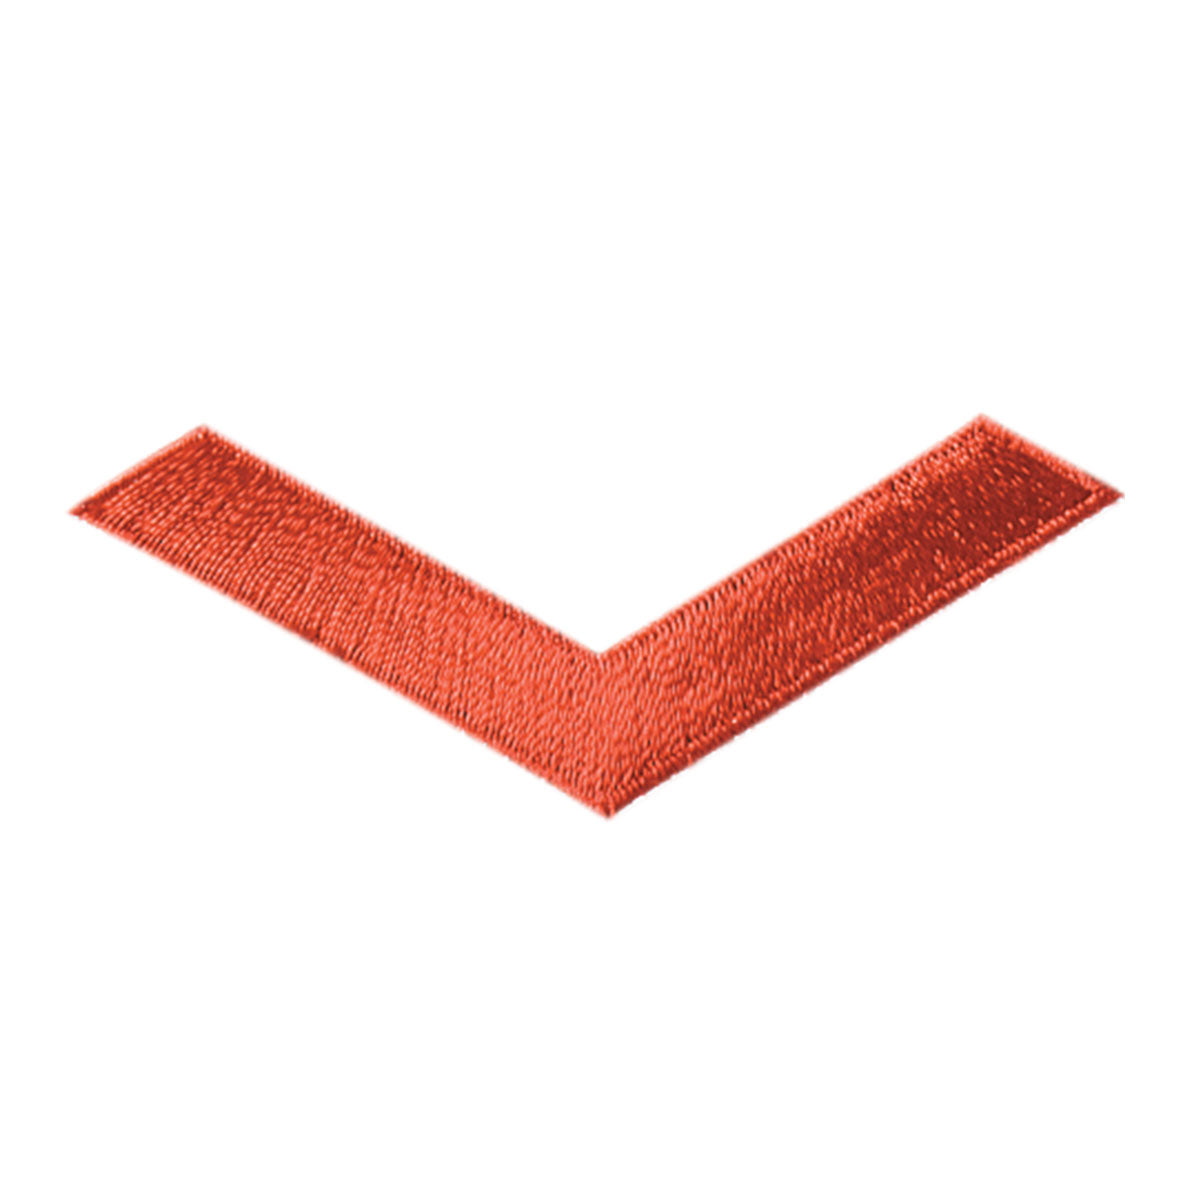 Chevron Patch Red